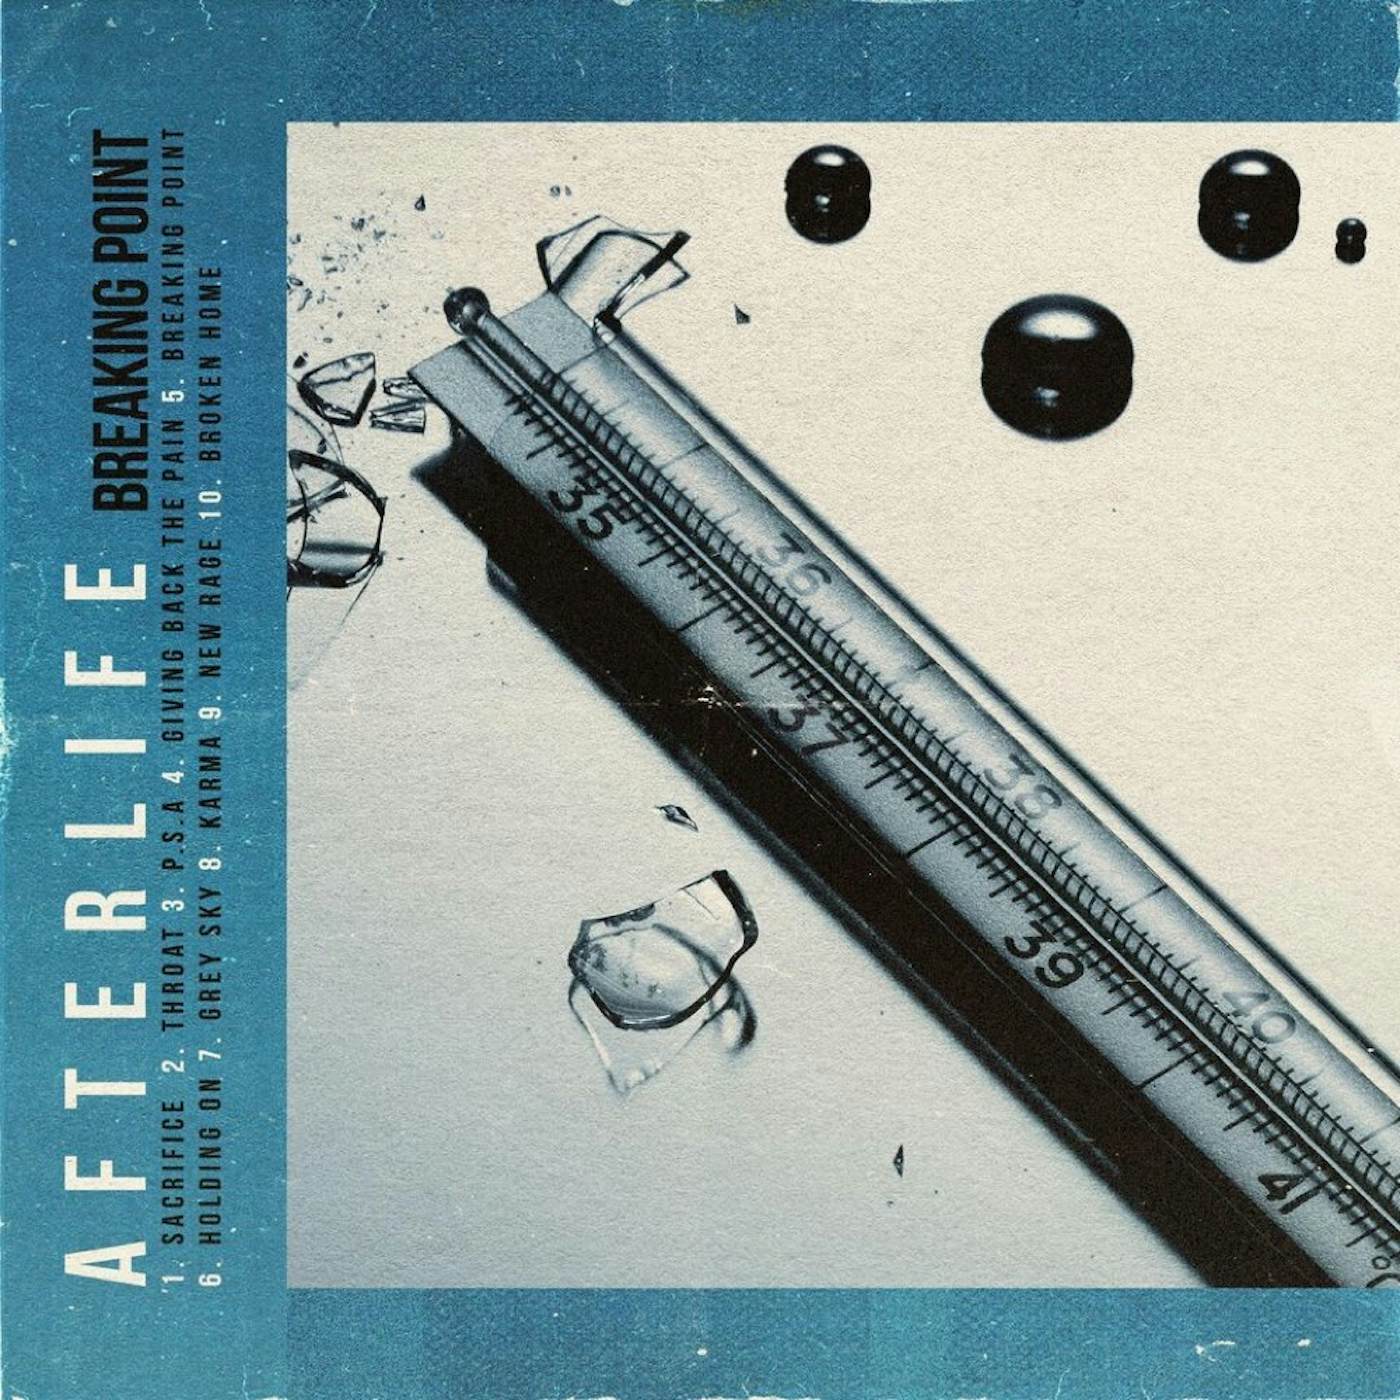 Afterlife Breaking Point CD